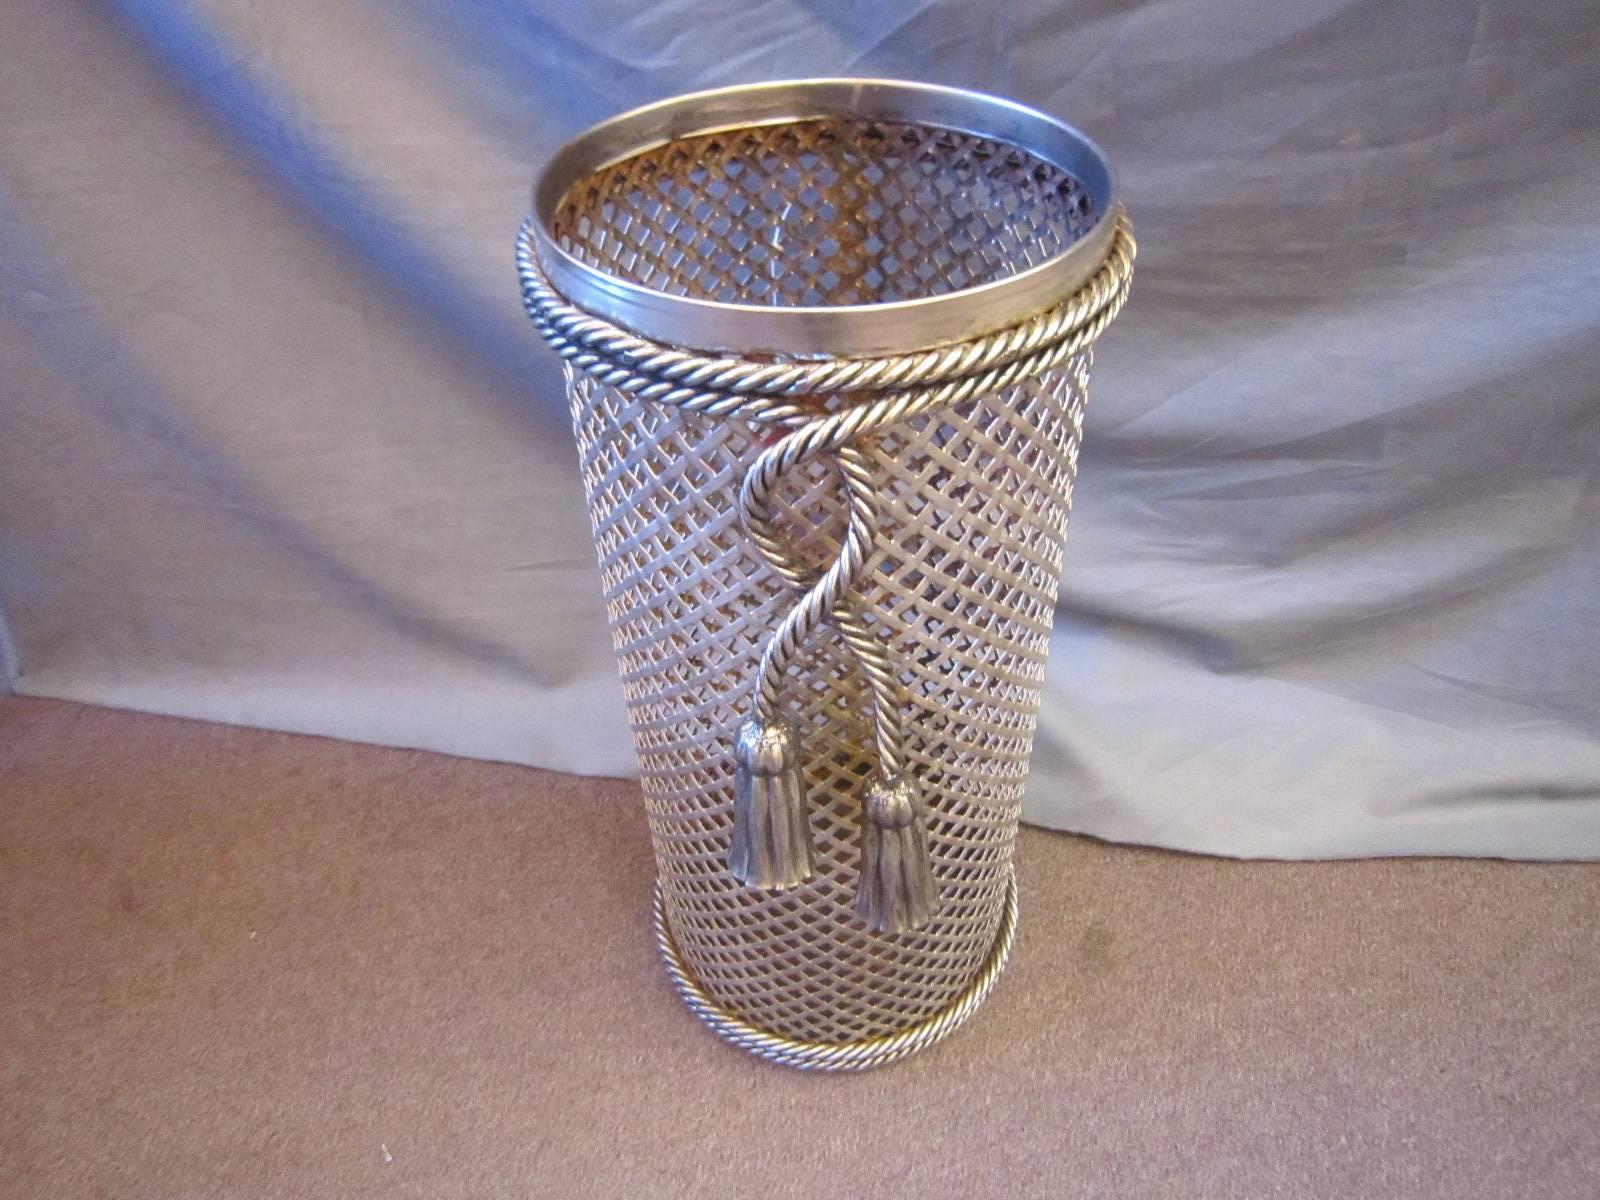 Modernist Italian nickeled iron umbrella or cane stand with perforated woven cage and rope twist tassel decoration. 
Can also be used as a wastebasket in an Industrial or moderne setting.
In fine, beautiful condition, some interior wear